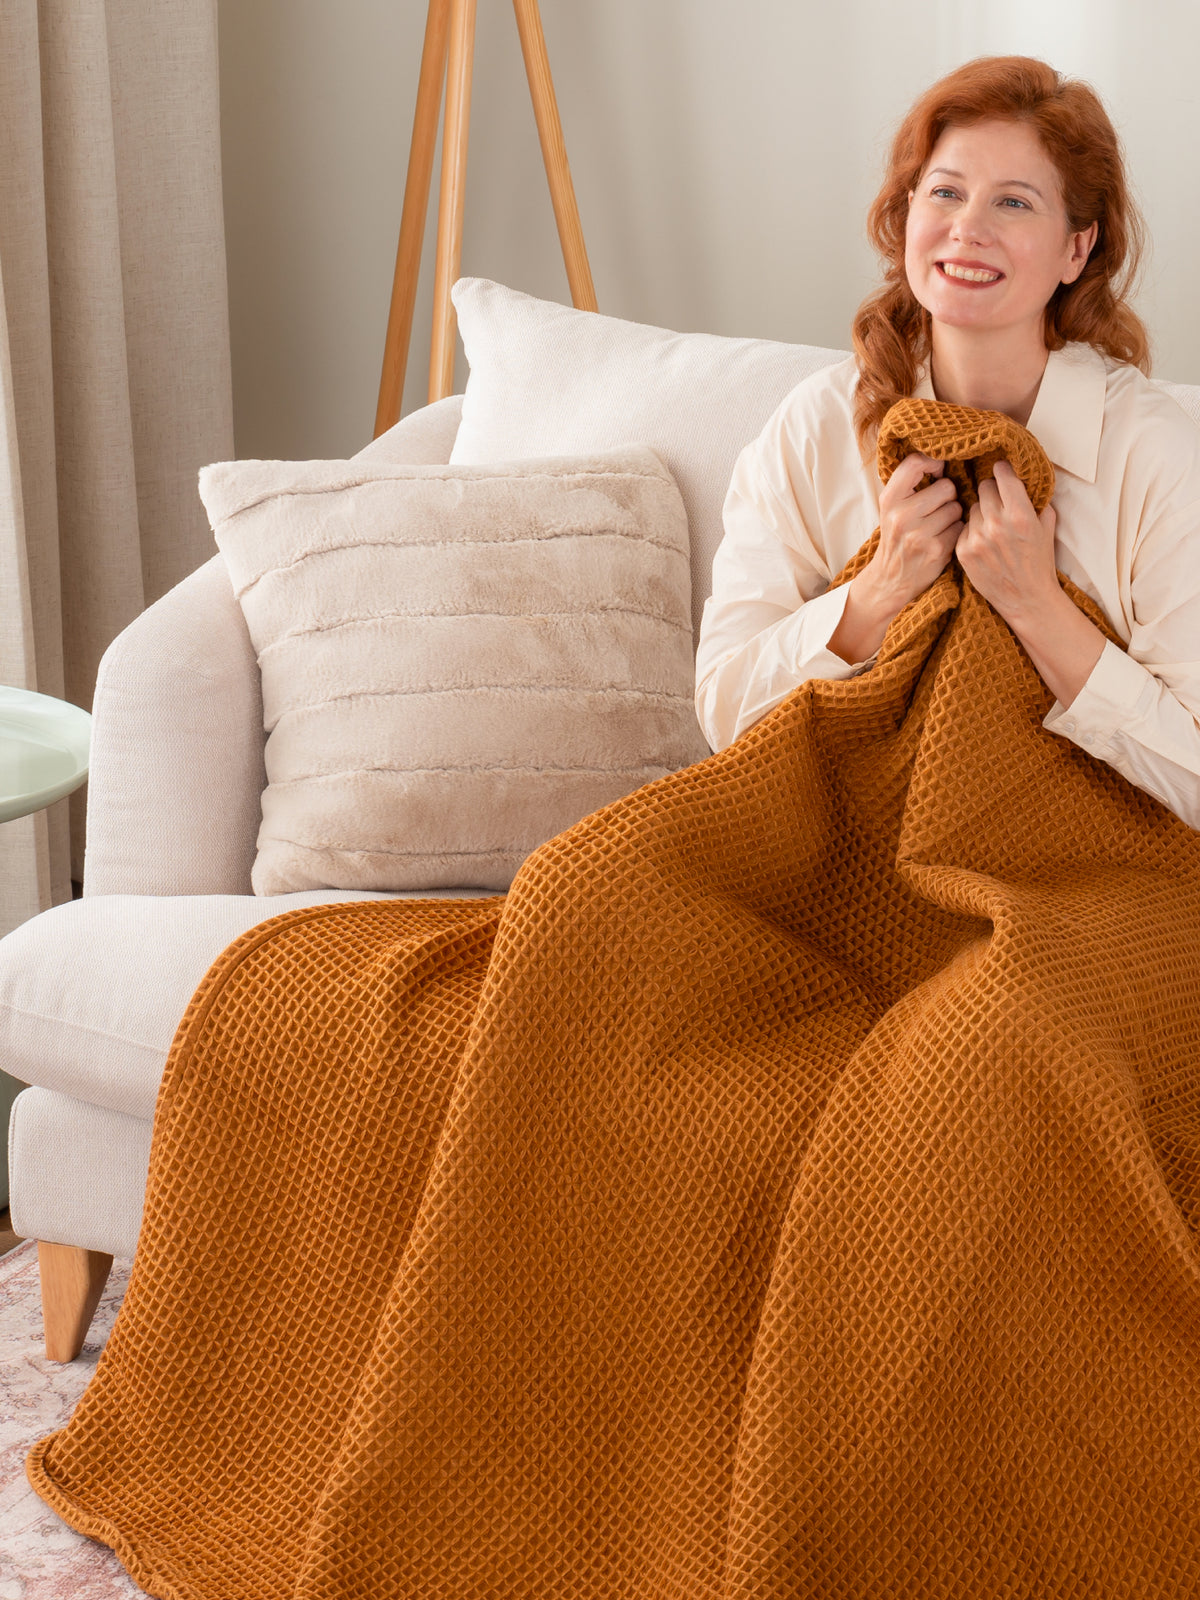 Throws collection image featuring our Waffle Knit Throw in Butterscotch draped over a woman's legs.